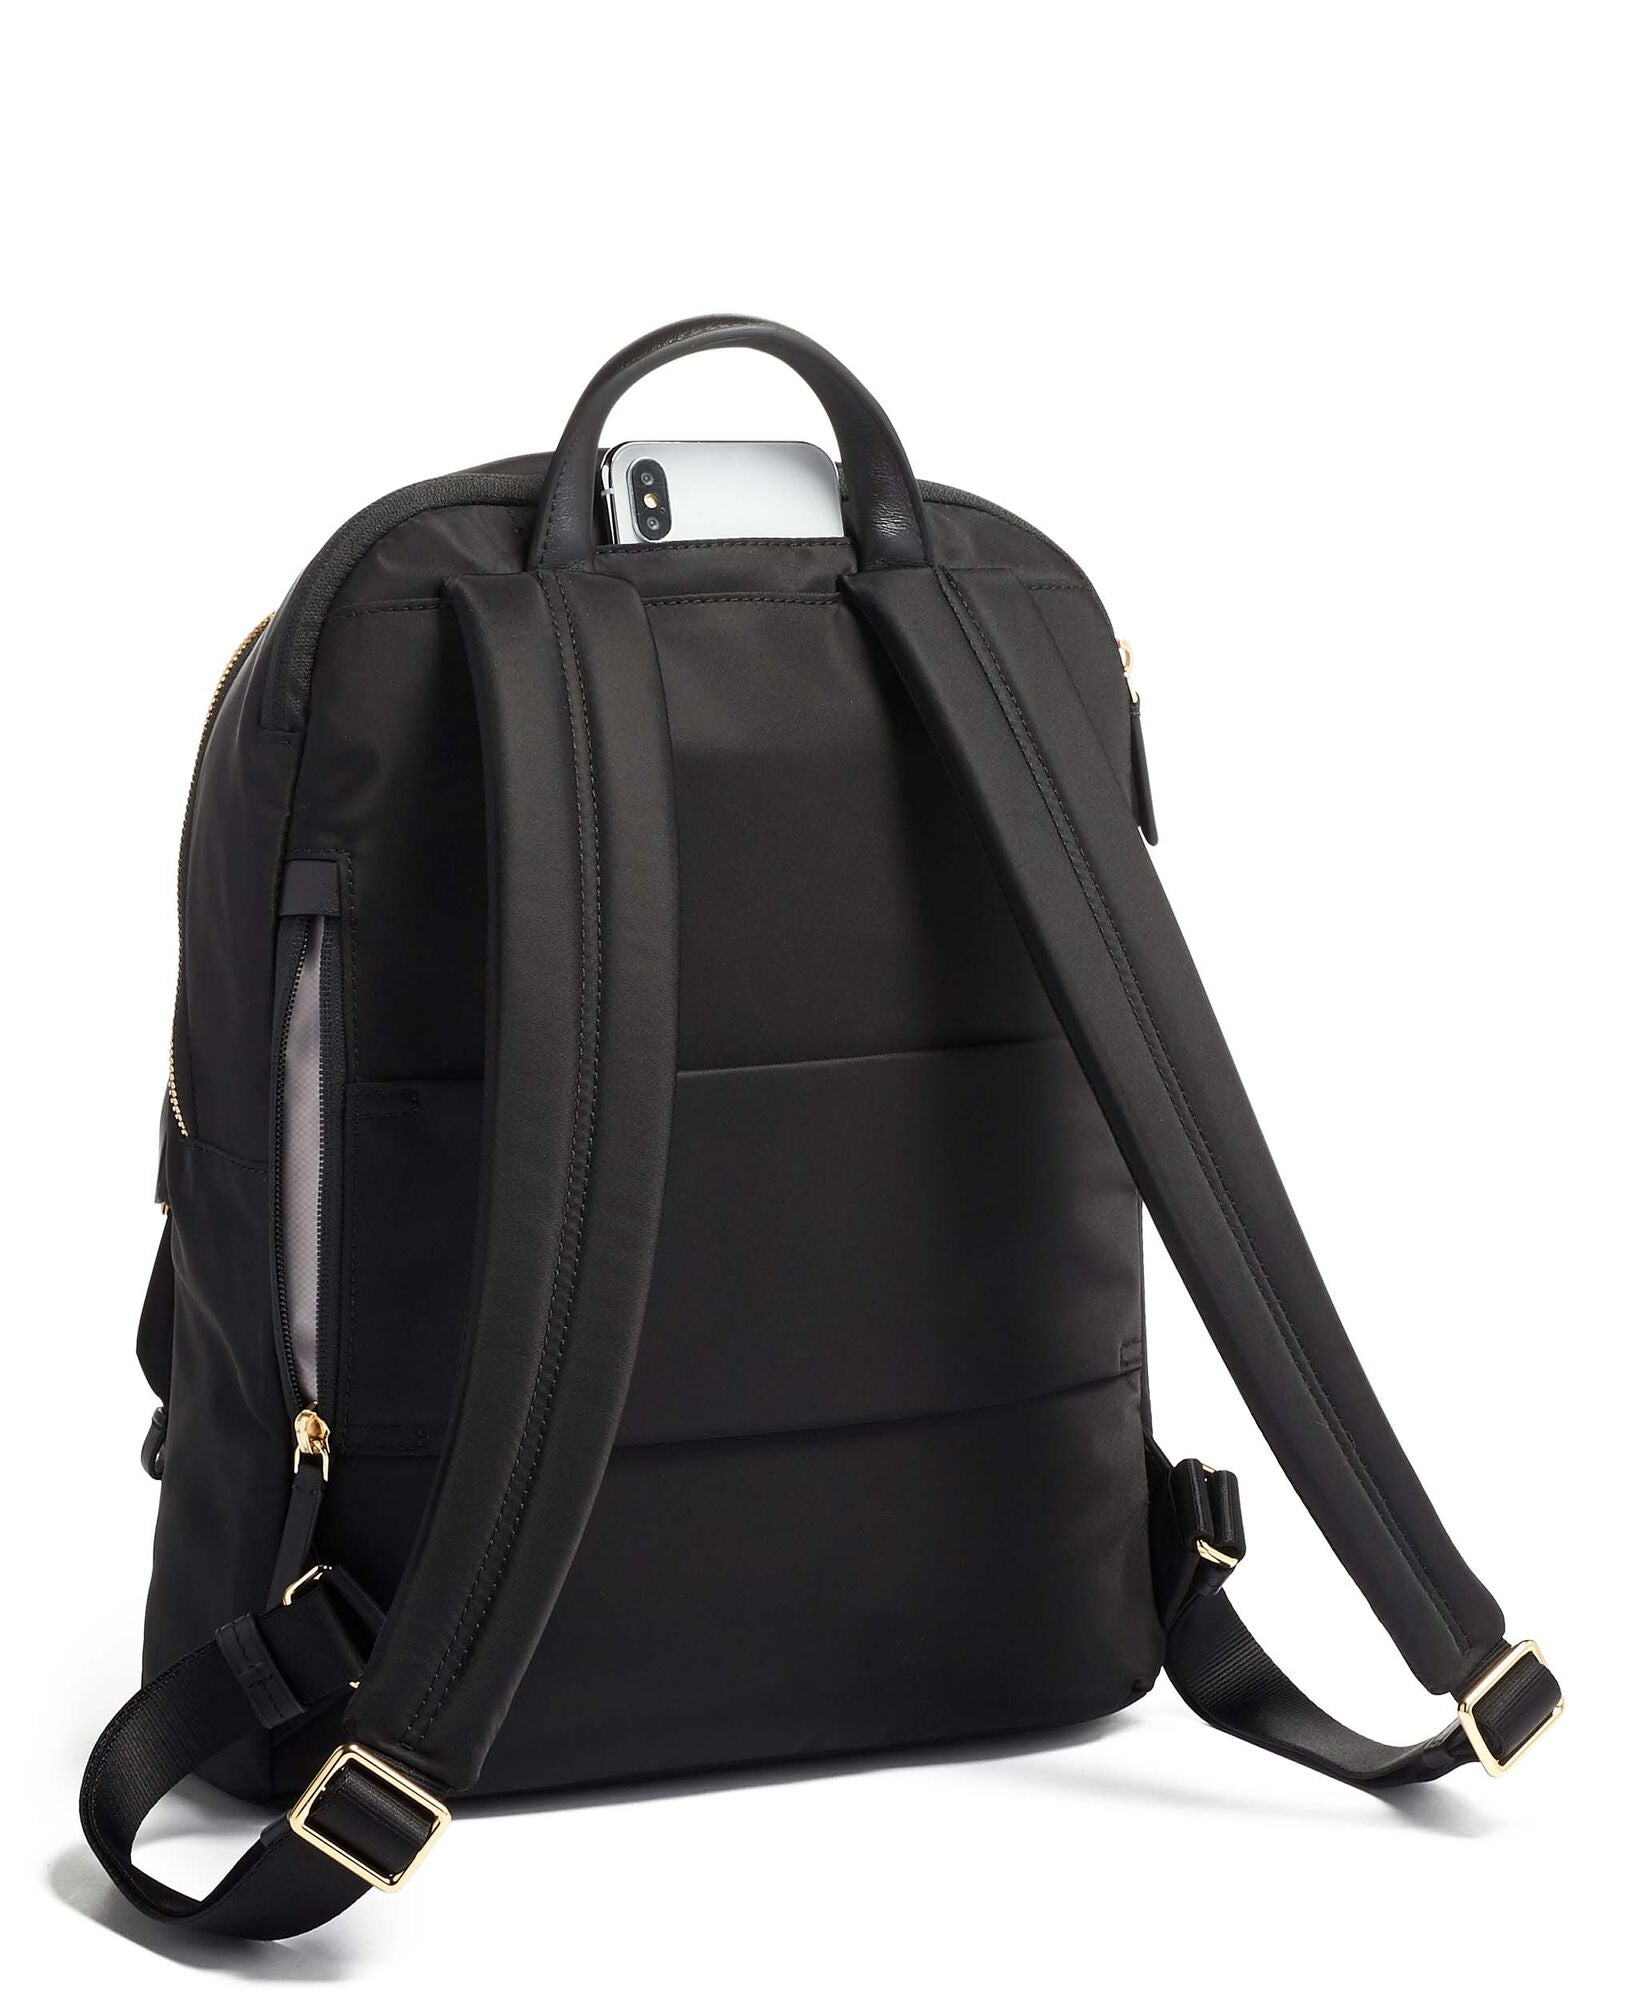 TUMI Hilden Backpack – Travel and Business Store